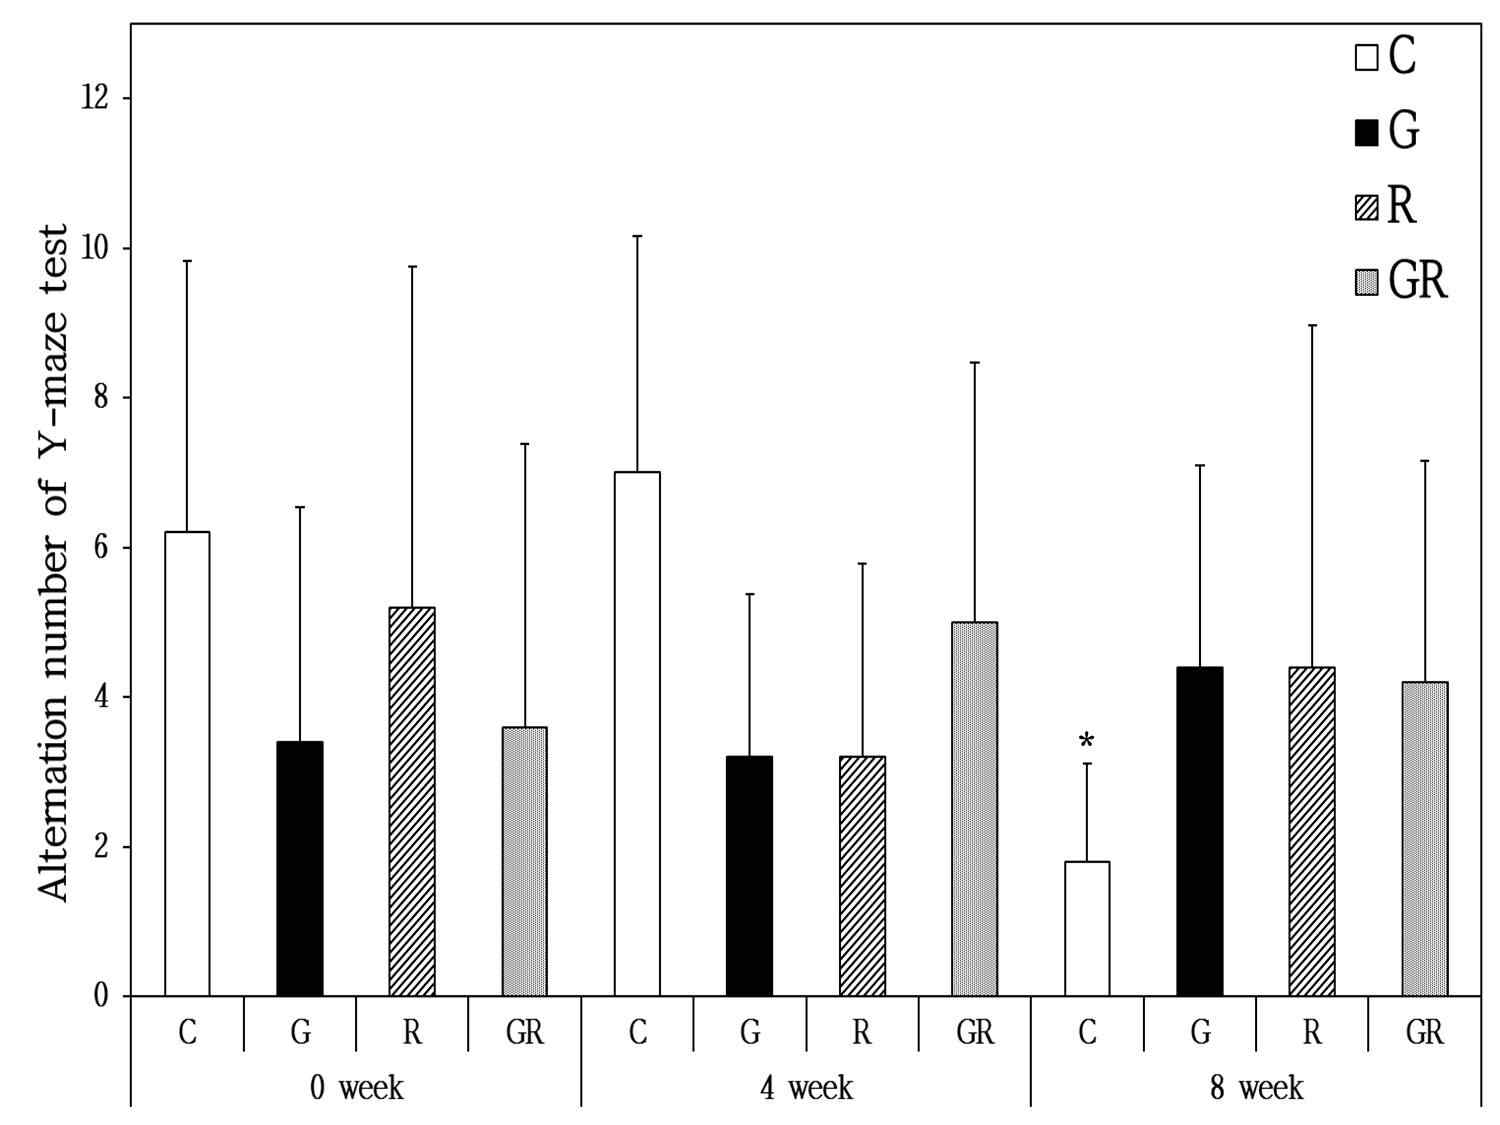 The effects of Ginseng Radix and Rehmanniae Radix extracts on B6C3-Tg mice in the alternation number for Y-maze test. C, Control Group; G, Ginseng Group; R, Rehmanniae Group; GR, Ginseng & Rehmanniae Group. * : Mean significantly different between all the experimental groups at p<0.05 by Wilcoxon's signed-ranks test